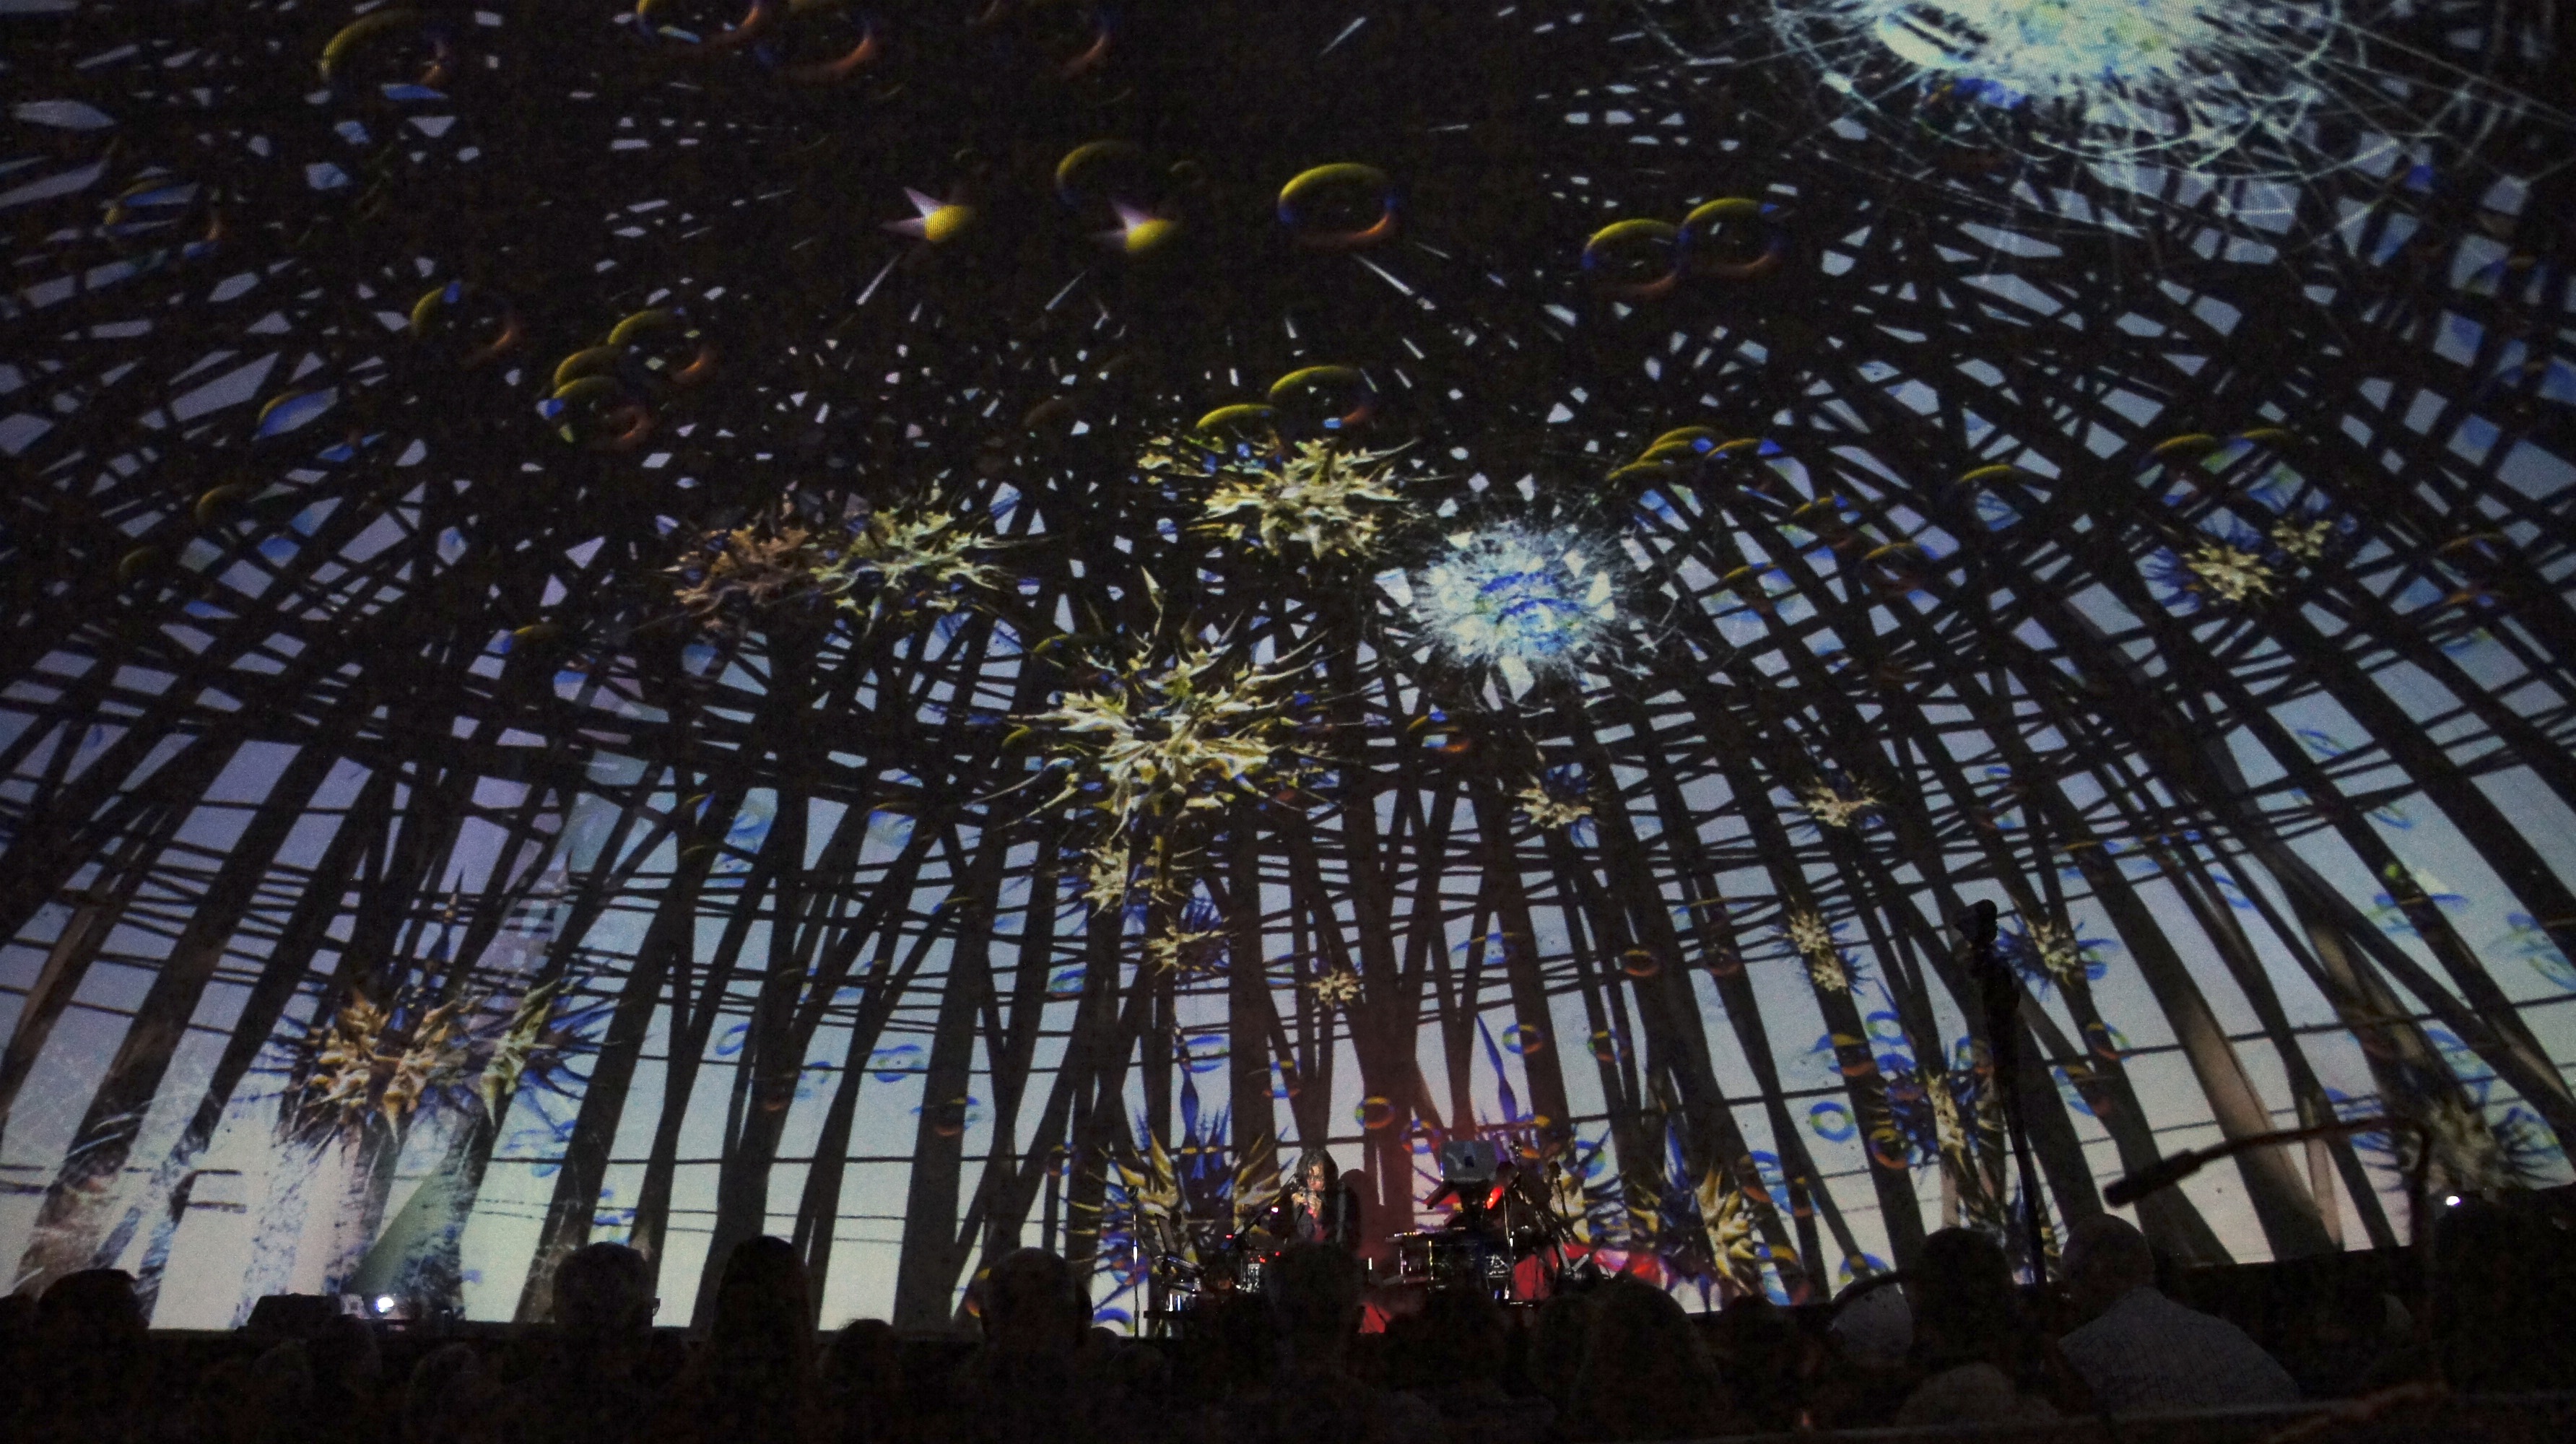 Steve Roach performs with visuals by Audri Phillips. 2013